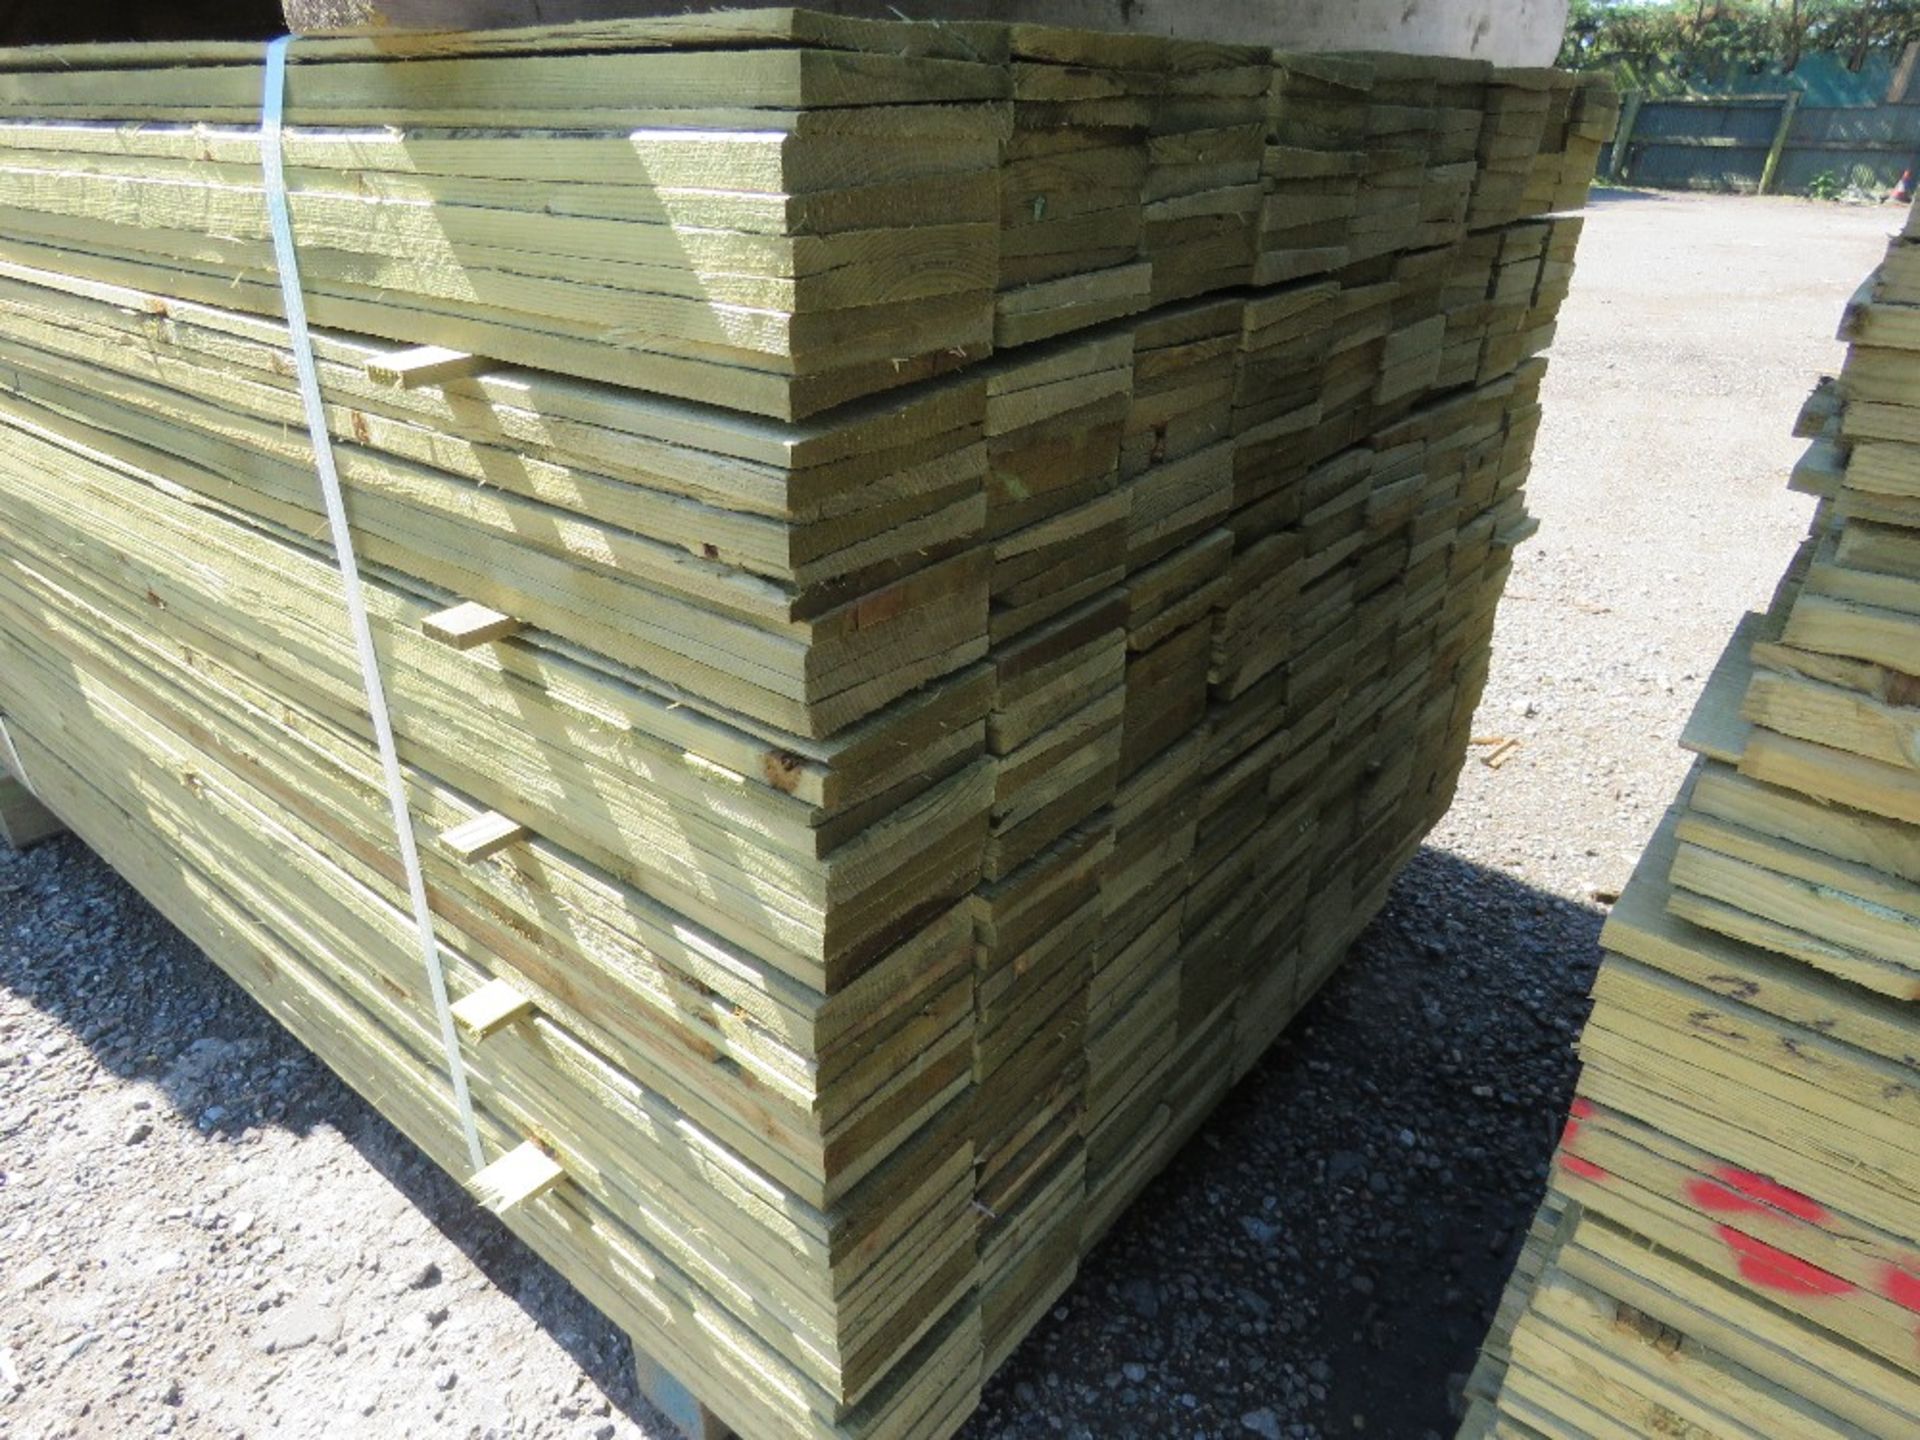 LARGE PACK OF PRESSURE TREATED FEATHER EDGE CLADDING TIMBER BOARDS 1.5M LENGTH X 100MM WIDTH APPROX. - Image 2 of 3